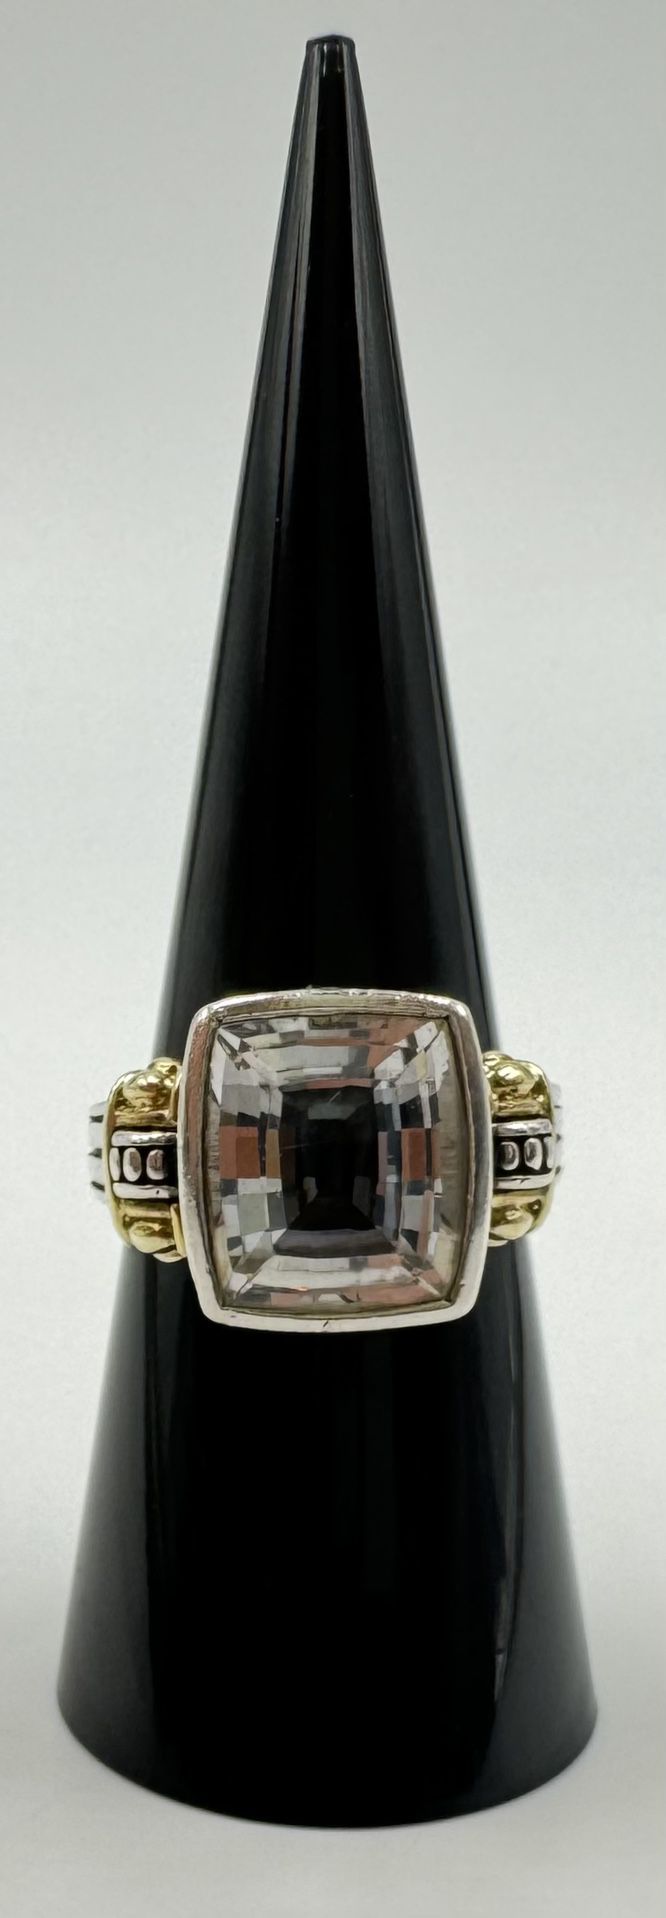 Lagos Caviar White Topaz Sterling Silver And 18k Gold Cocktail Ring Size 7